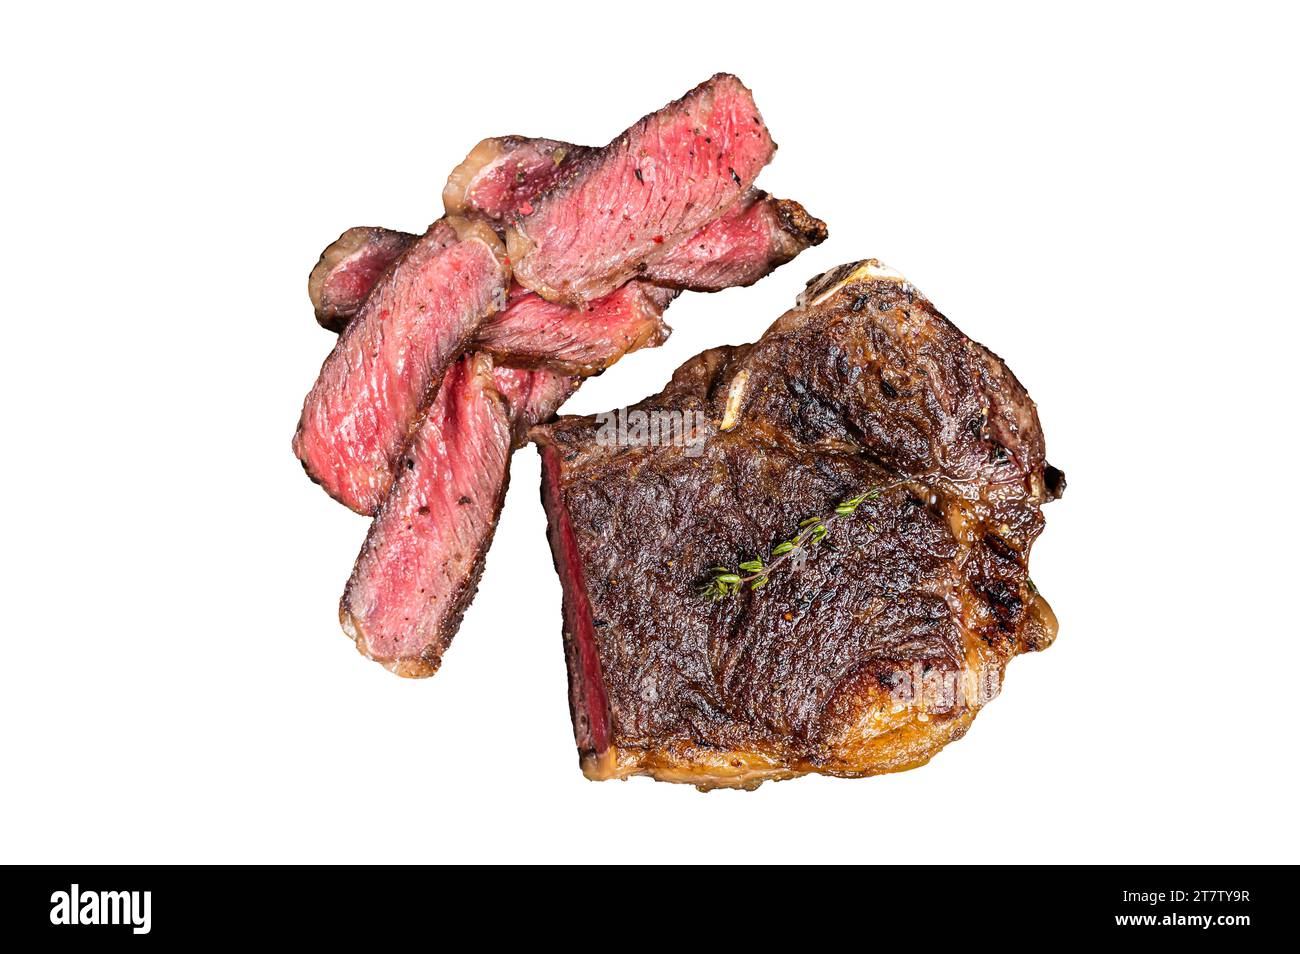 Roasted Sliced Wagyu New York beef meat steak or Striploin steak in a steel tray with herbs. Isolated, white background Stock Photo